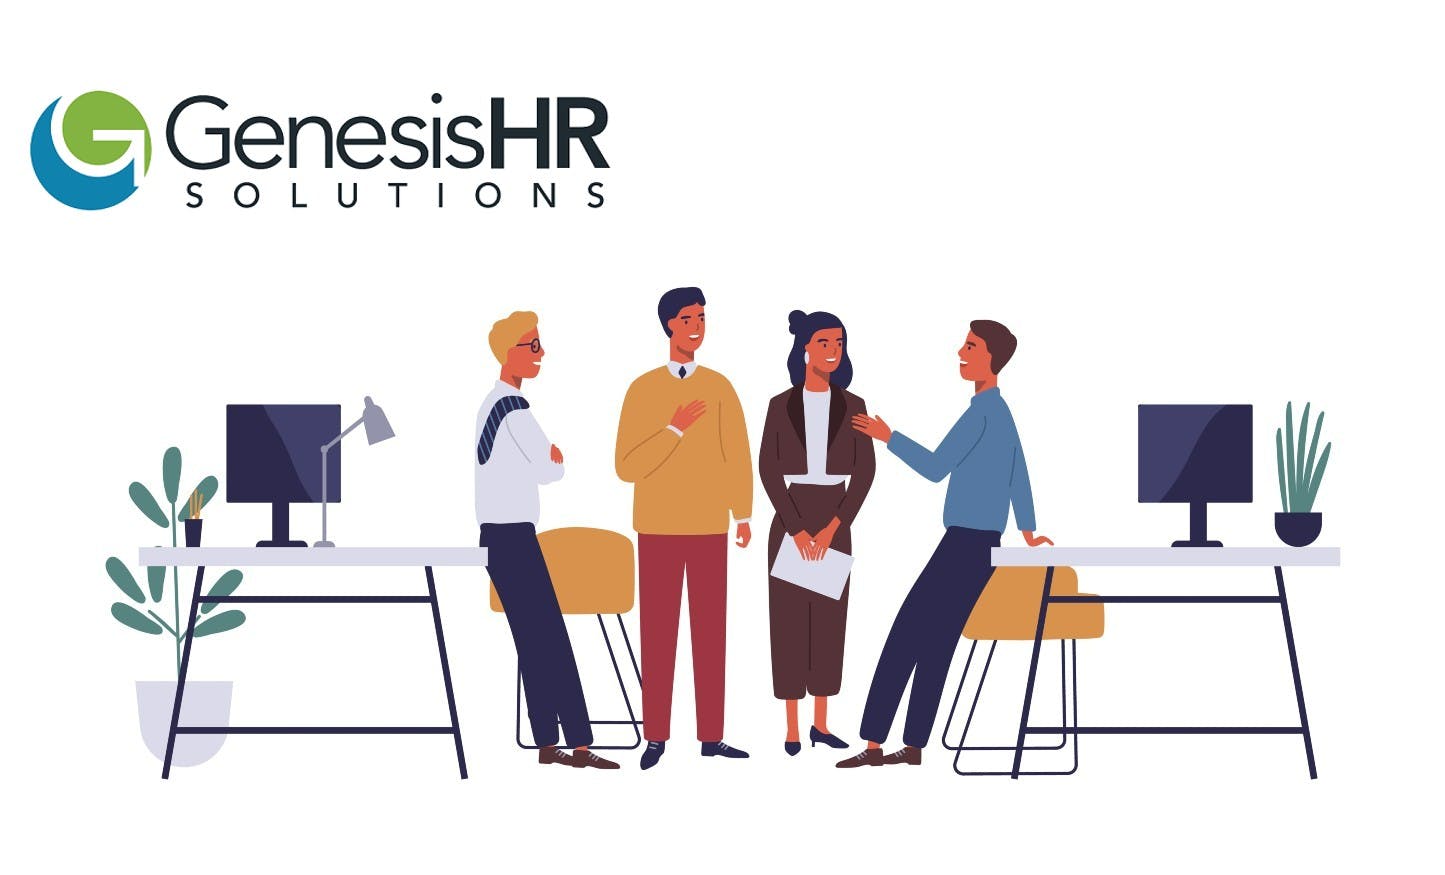 Genesis HR Solutions Review: Benefits, Cost, and Plans